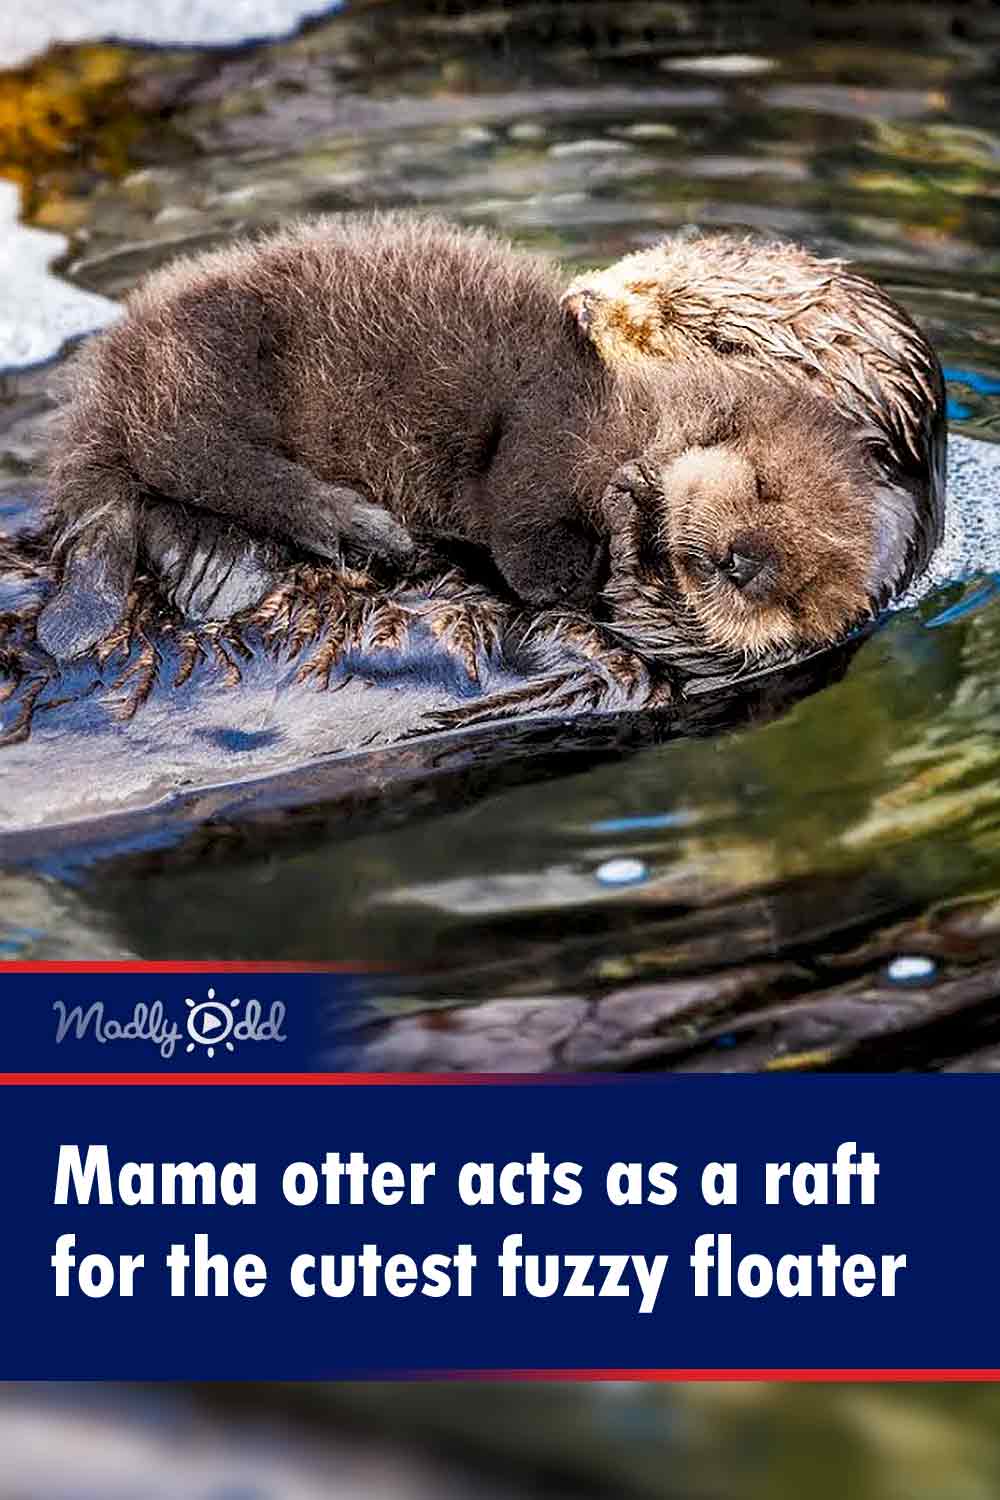 Mama otter acts as a raft for the cutest fuzzy floater